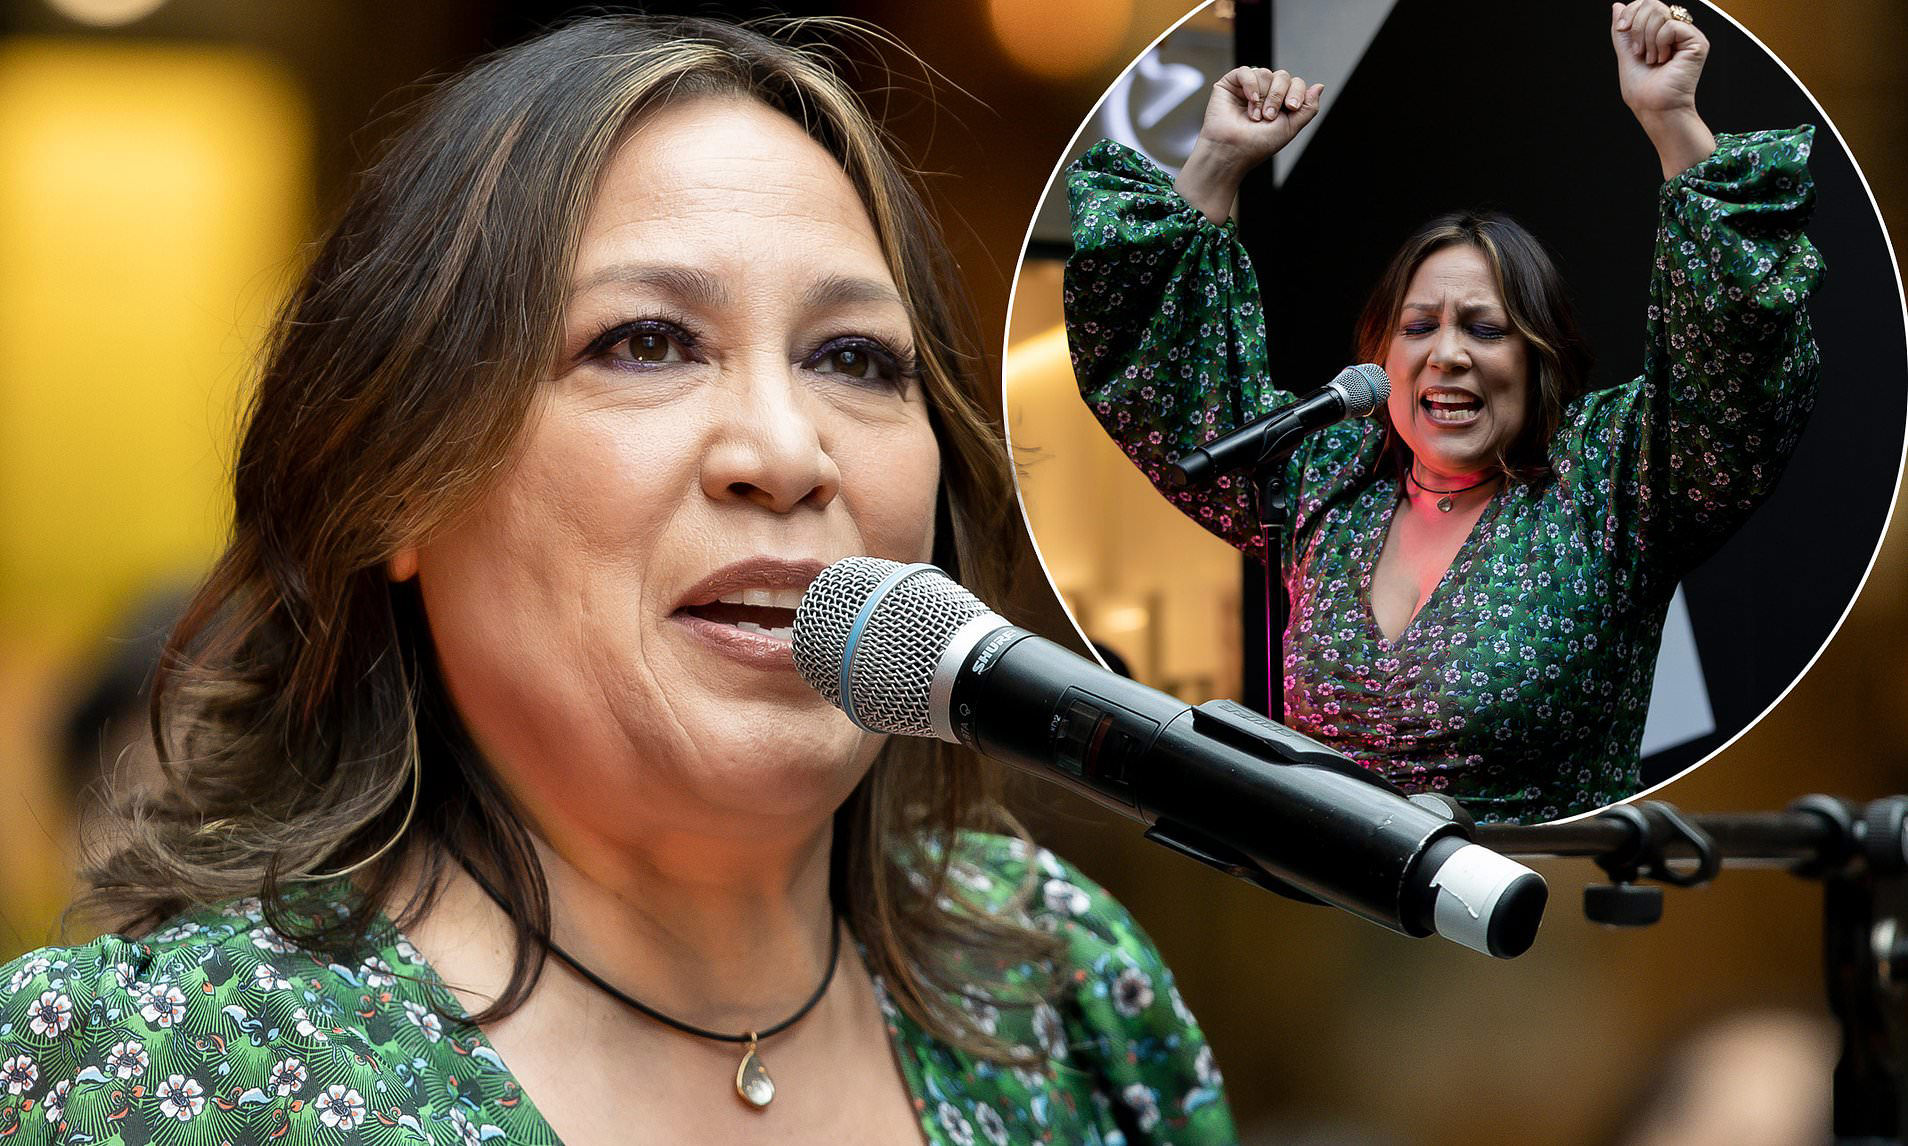 Kate Ceberano is all smiles as she performs free concert in Melbourne